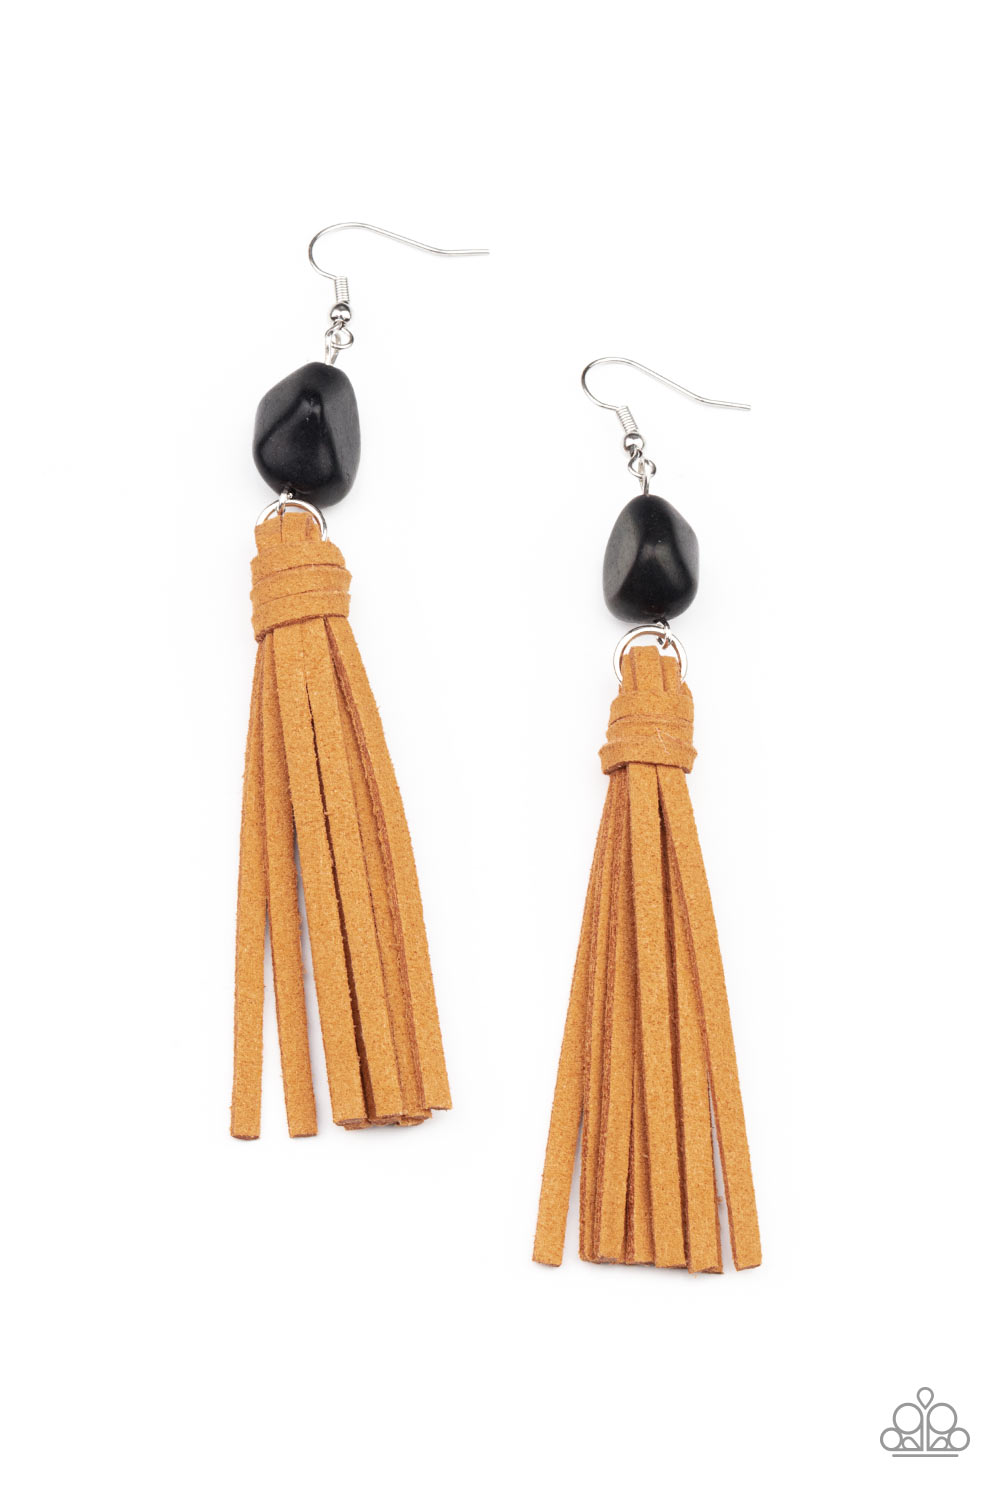 All-Natural Allure - Black Stone - Brown Suede Tassel Earrings - Paparazzi Accessories - 
A rustic brown suede tassel swings from the bottom of an imperfect black stone, creating an earthy centerpiece. Earring attaches to a standard fishhook fitting. Sold as one pair of earrings.
